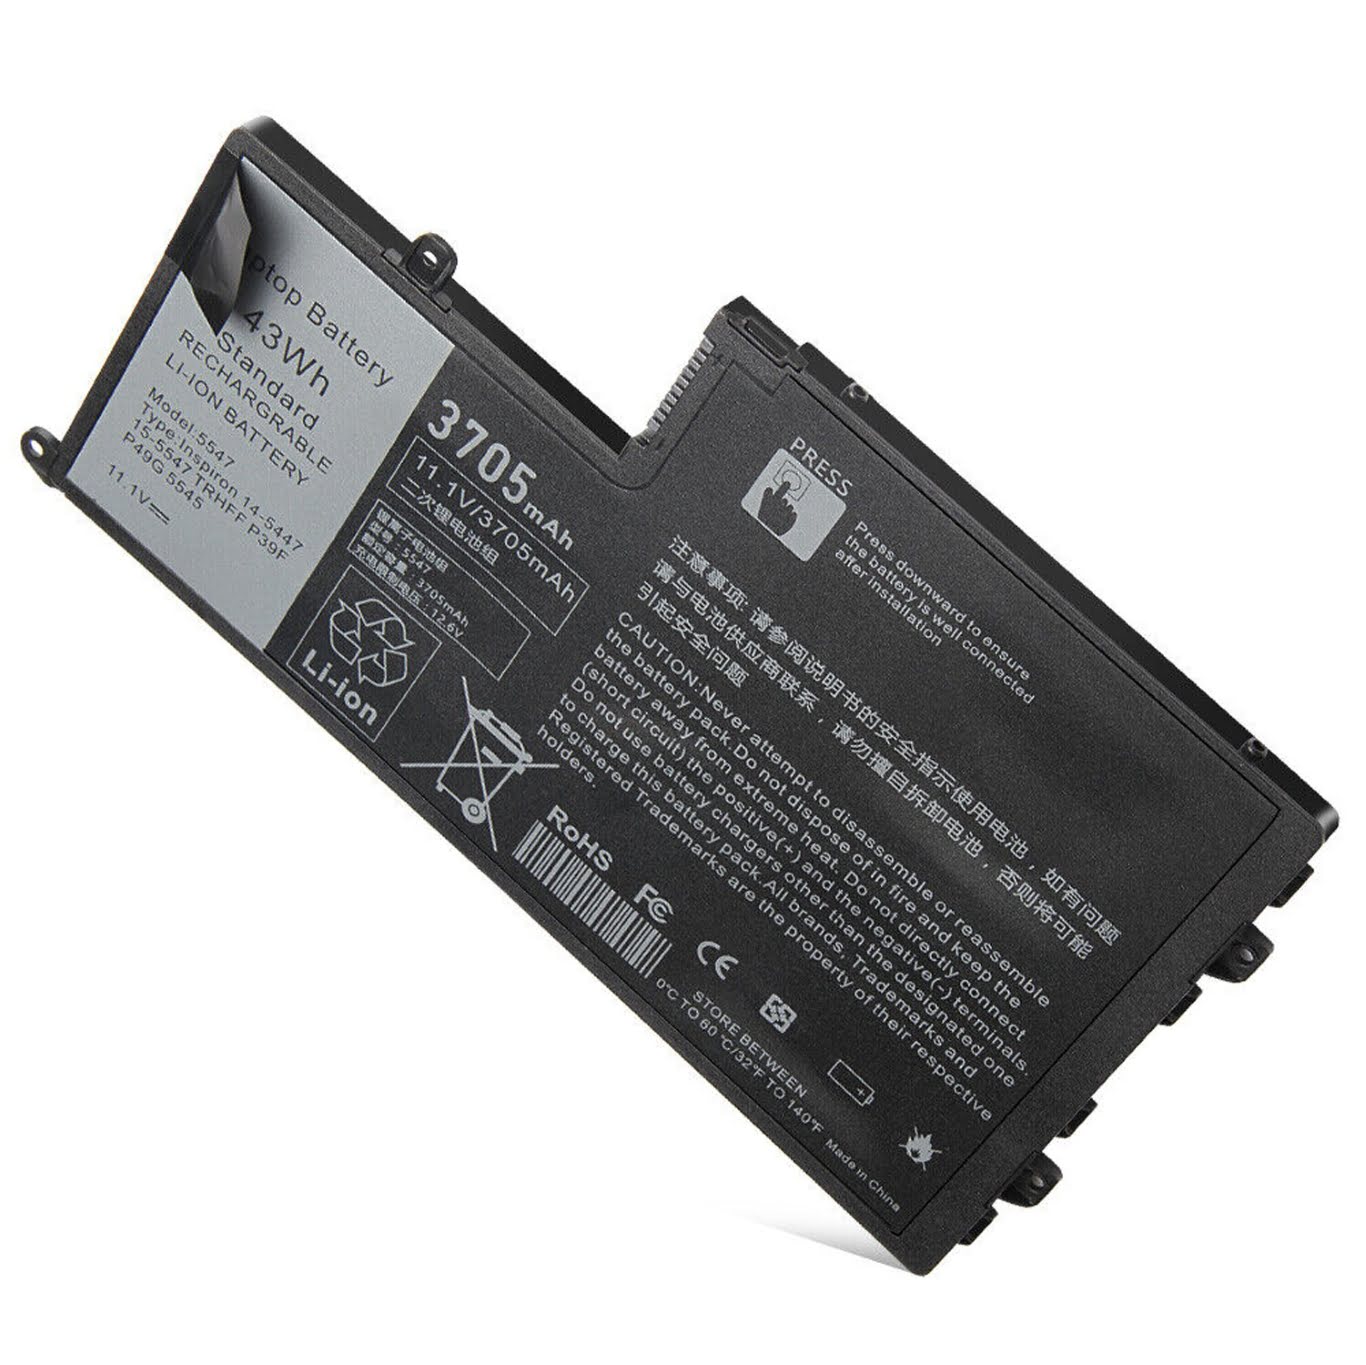 01v2f6, 0DFVYN replacement Laptop Battery for Dell Inspiron 5445, Inspiron 5447, 11.1V, 3 cells, 3800mah/43wh